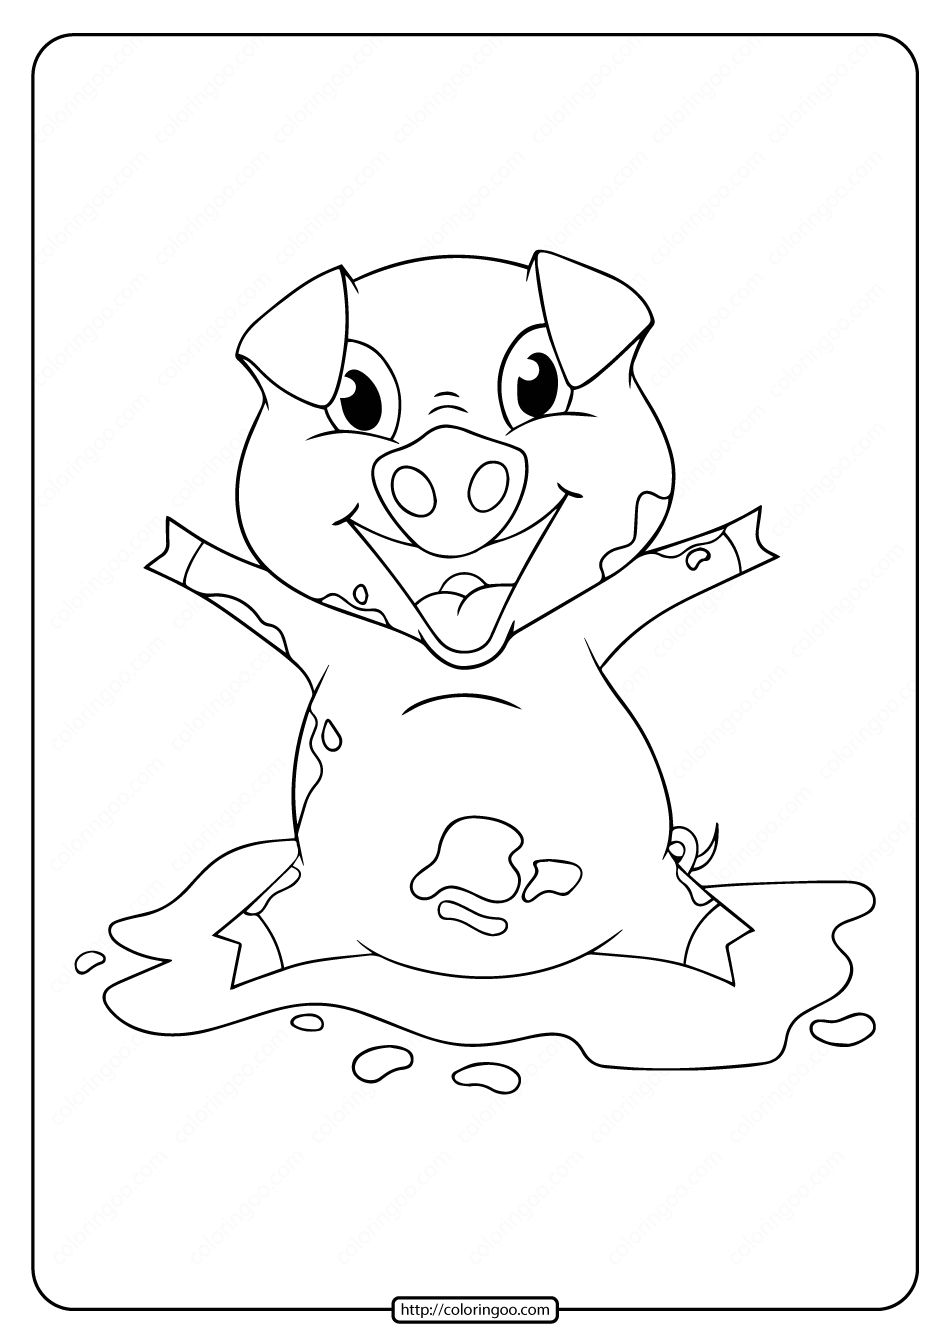 printable happy pig playing coloring pages